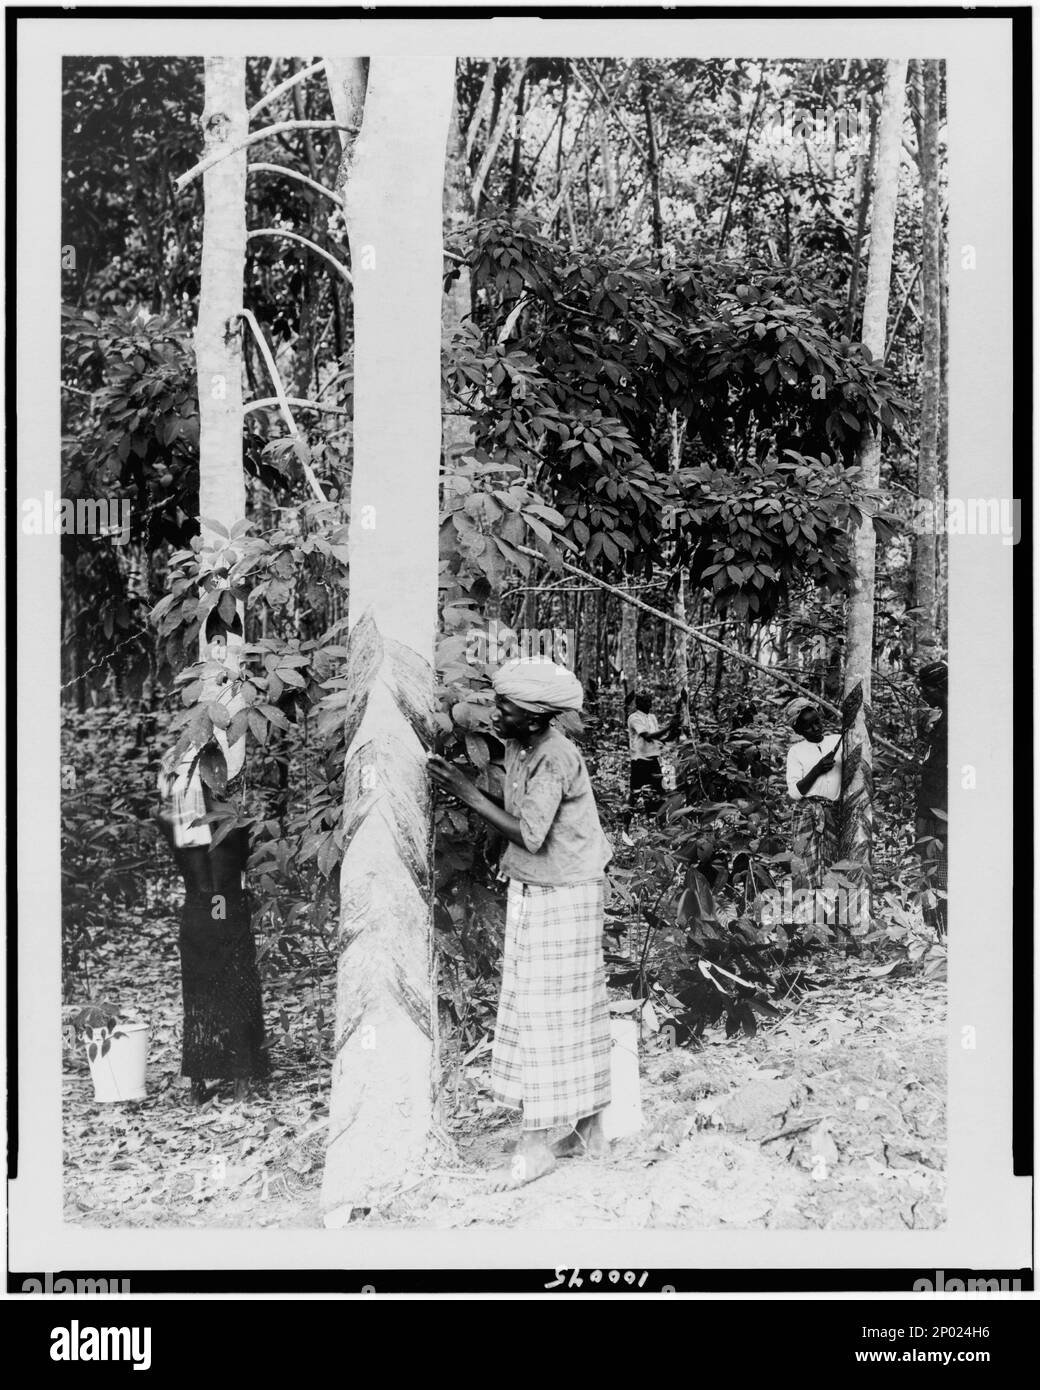 Gathering rubber sap, Java, Indonesia. Frank and Frances Carpenter Collection, Tapping,Indonesia,Java,1900-1930, Rubber trees,Indonesia,Java,1900-1930. Stock Photo